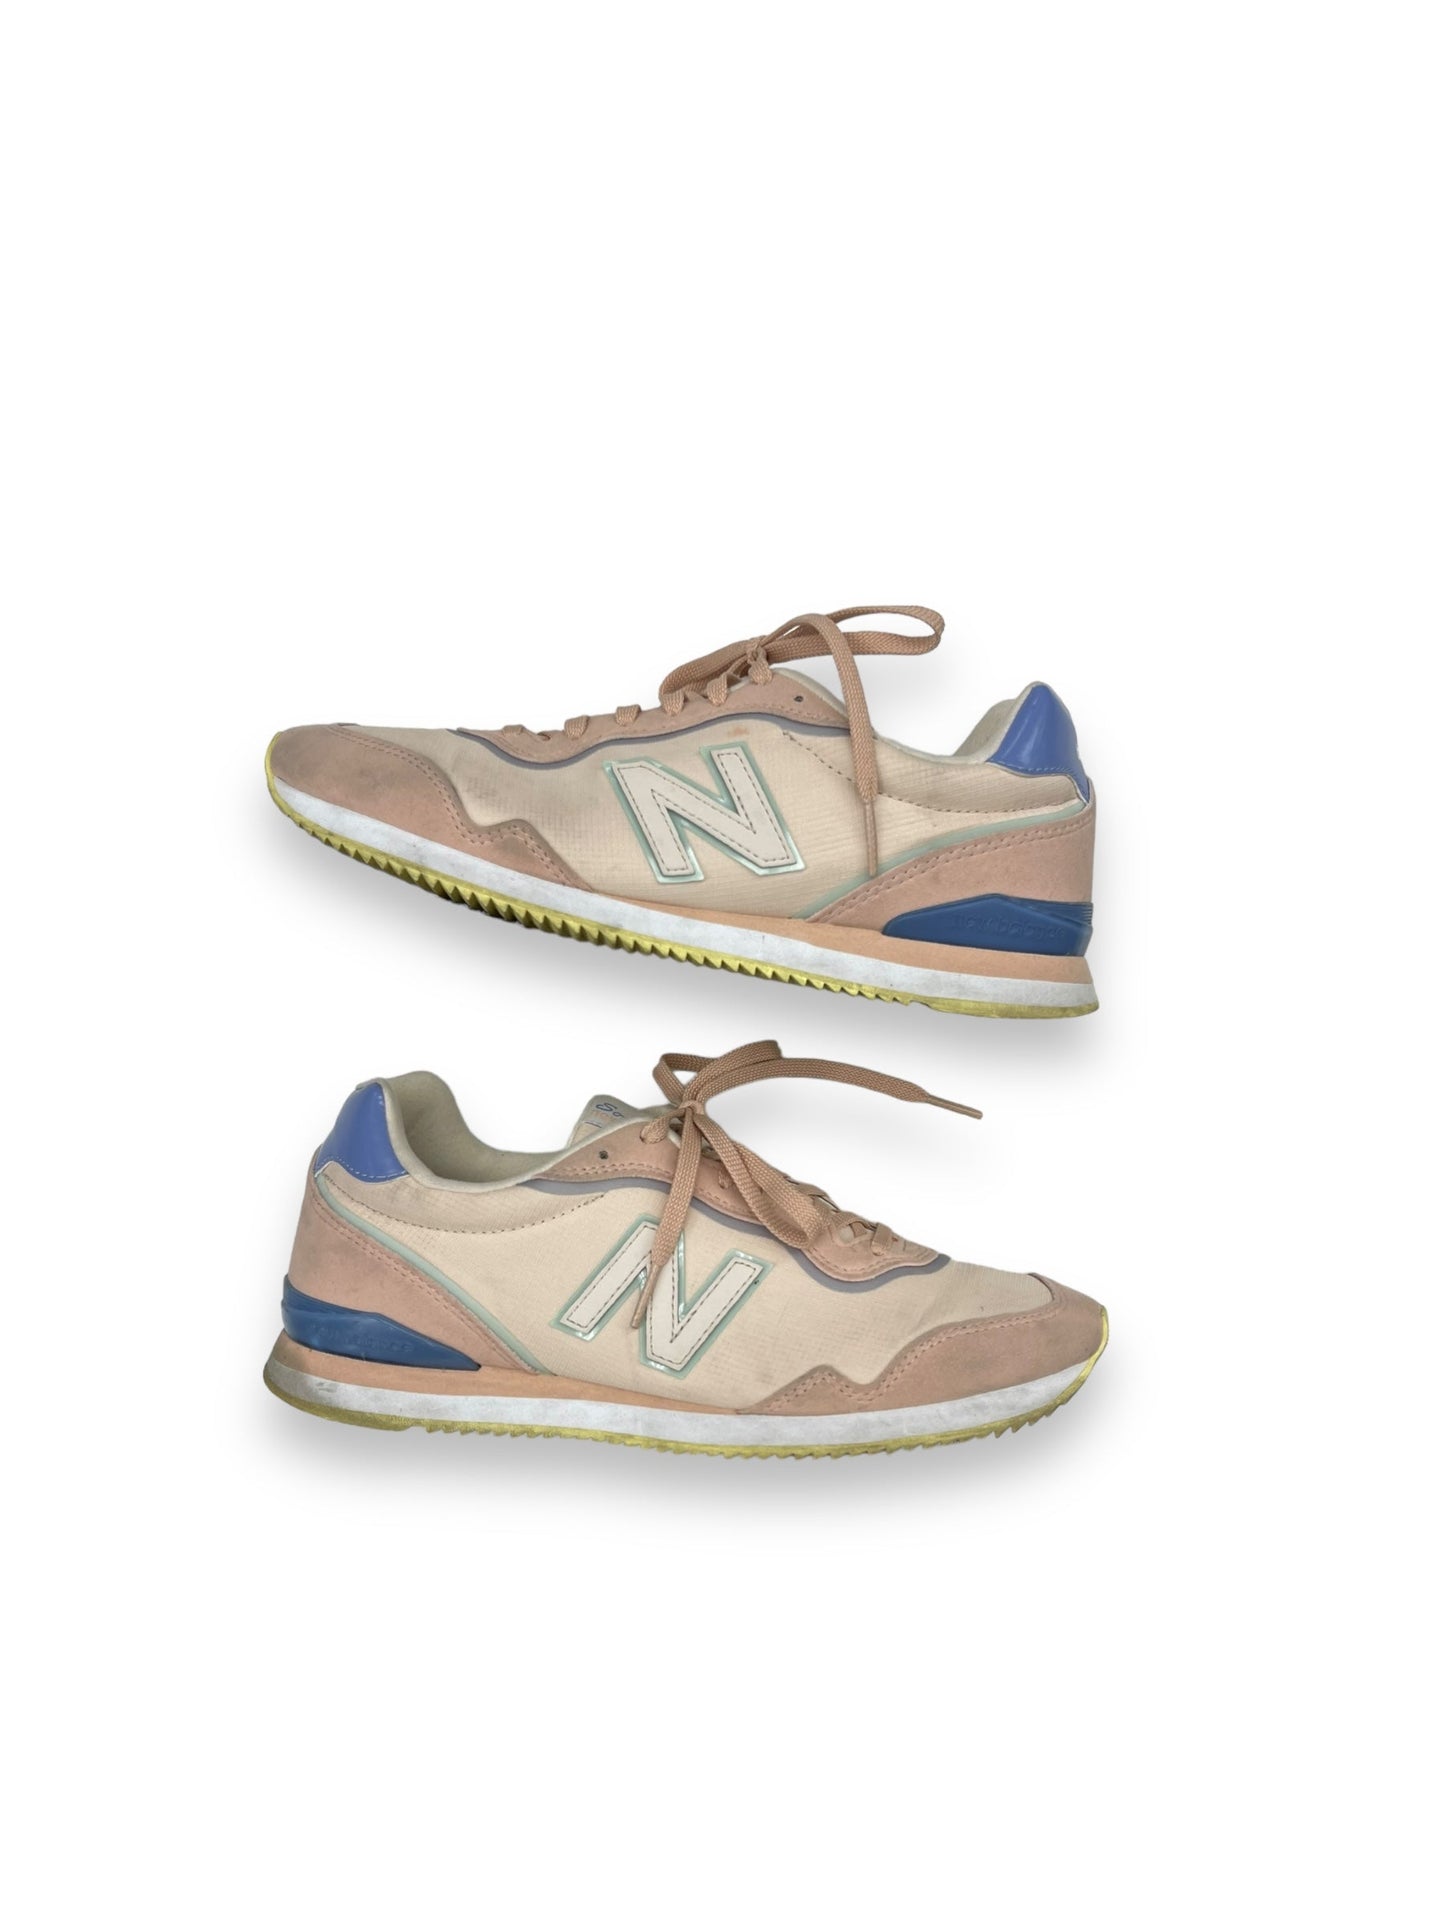 Shoes Sneakers By New Balance  Size: 9